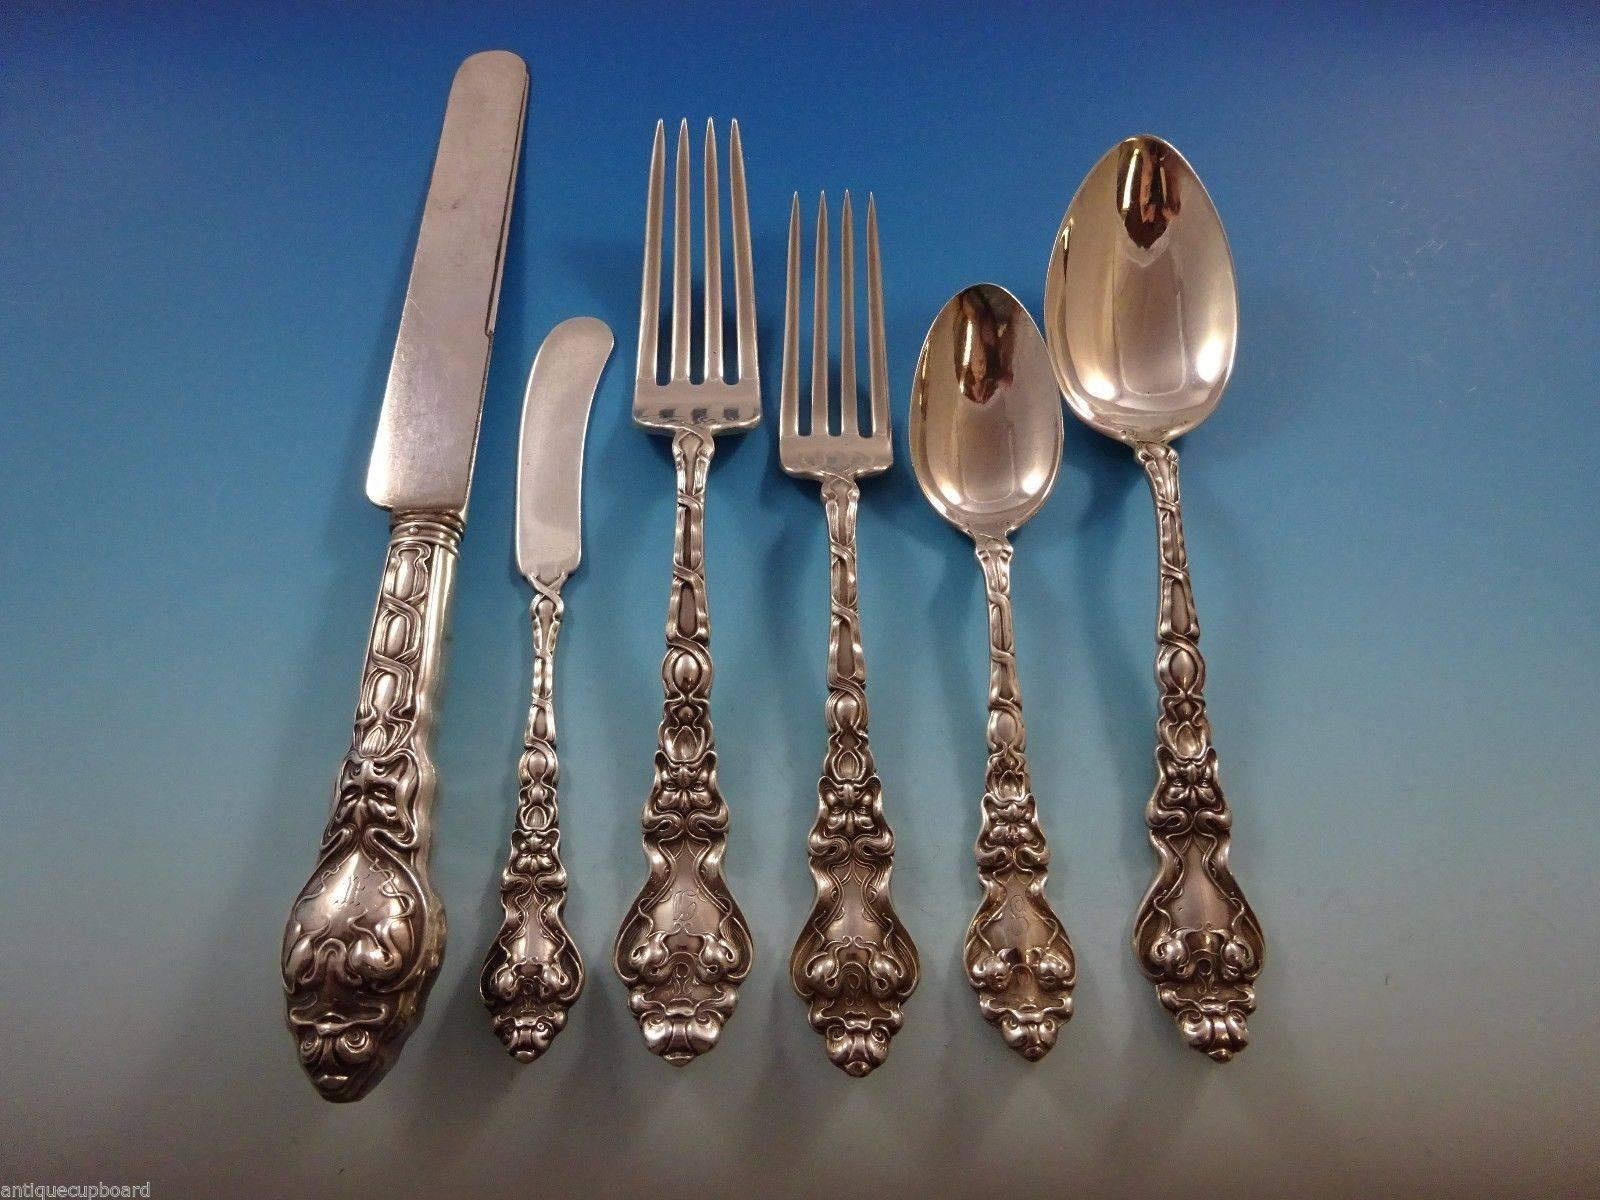 Exceptional Figural Art Nouveau Douvaine by Unger sterling silver flatware dinner size set of 61 pieces. This pattern features a stylized dolphin and the face of the North Wind. This set includes:

Eight dinner knives, 9 1/2